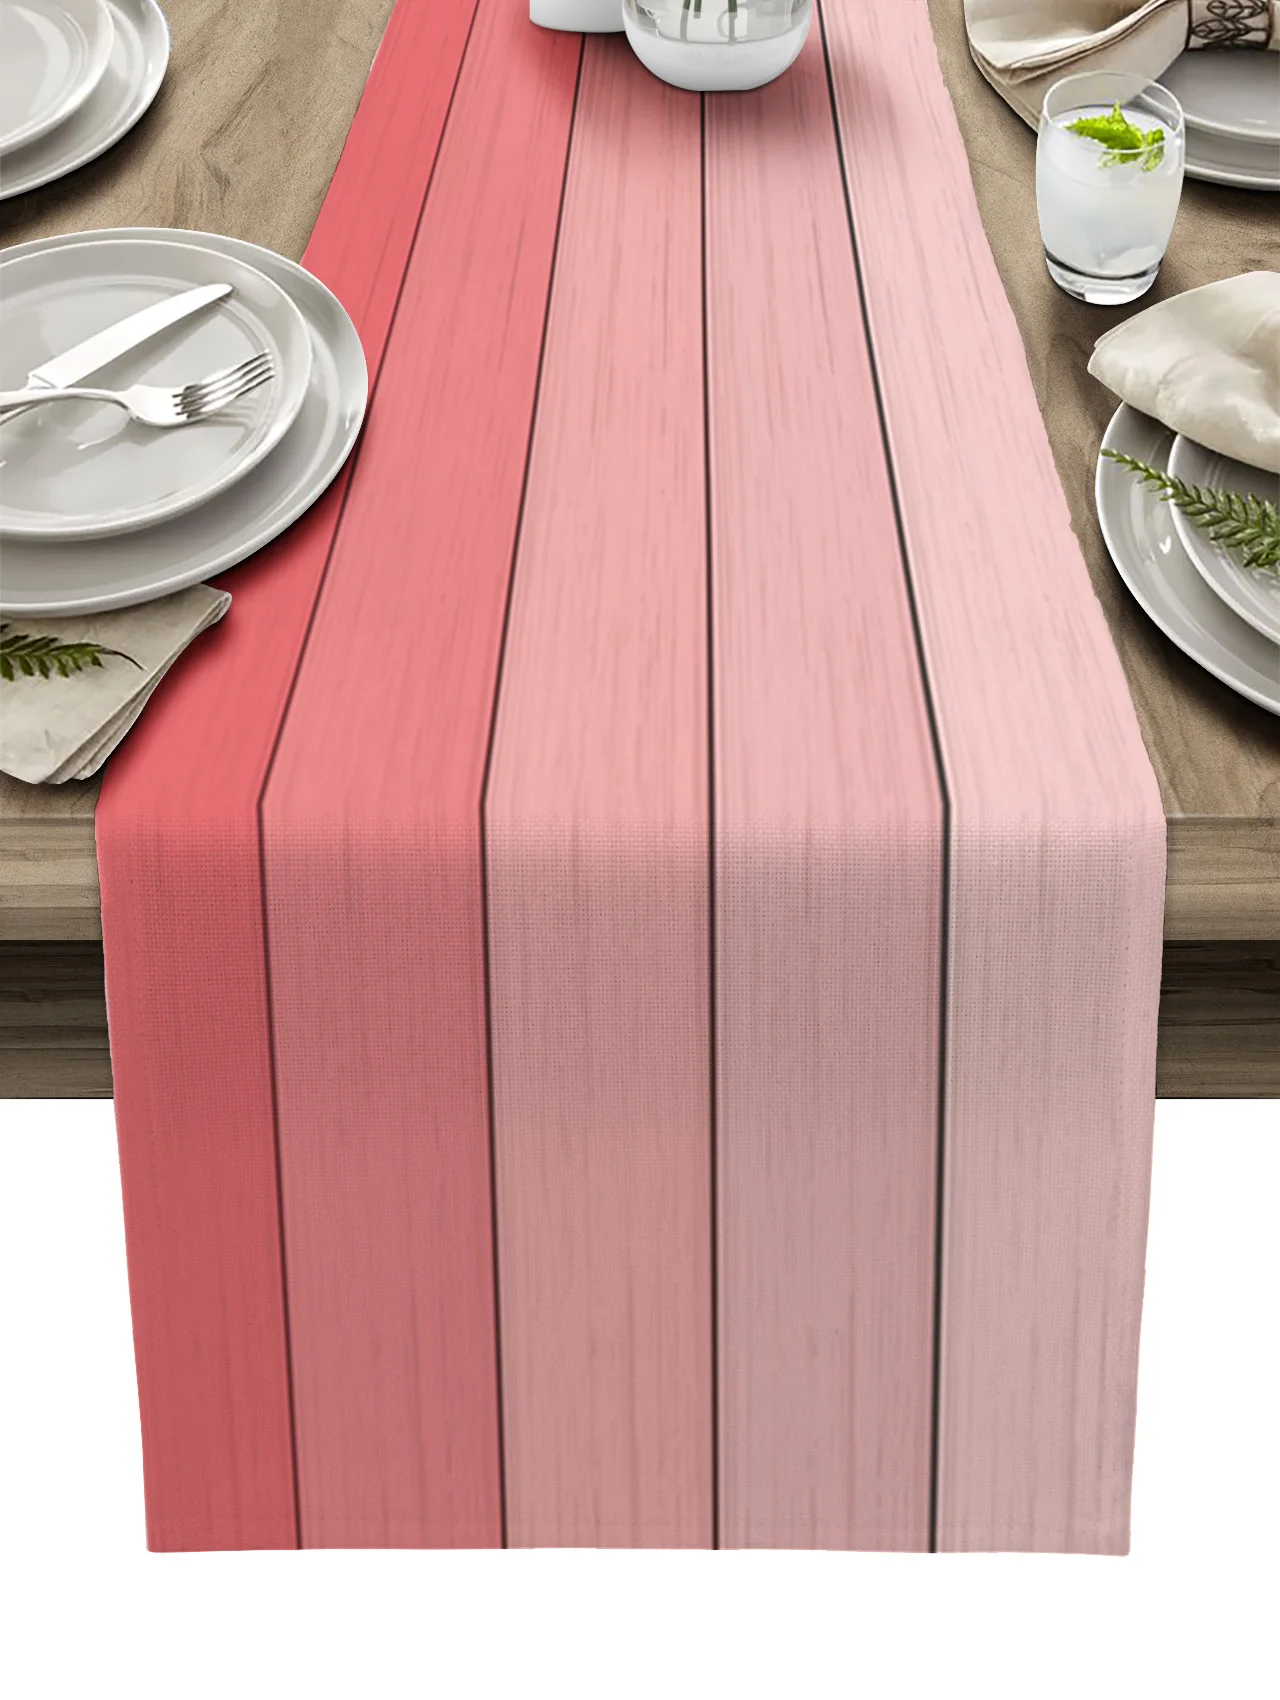 

Wood Grain Pink Gradient Linen Table Runner Kitchen Table Decoration Farmhouse Reusable Dining Tablecloth Wedding Party Decor